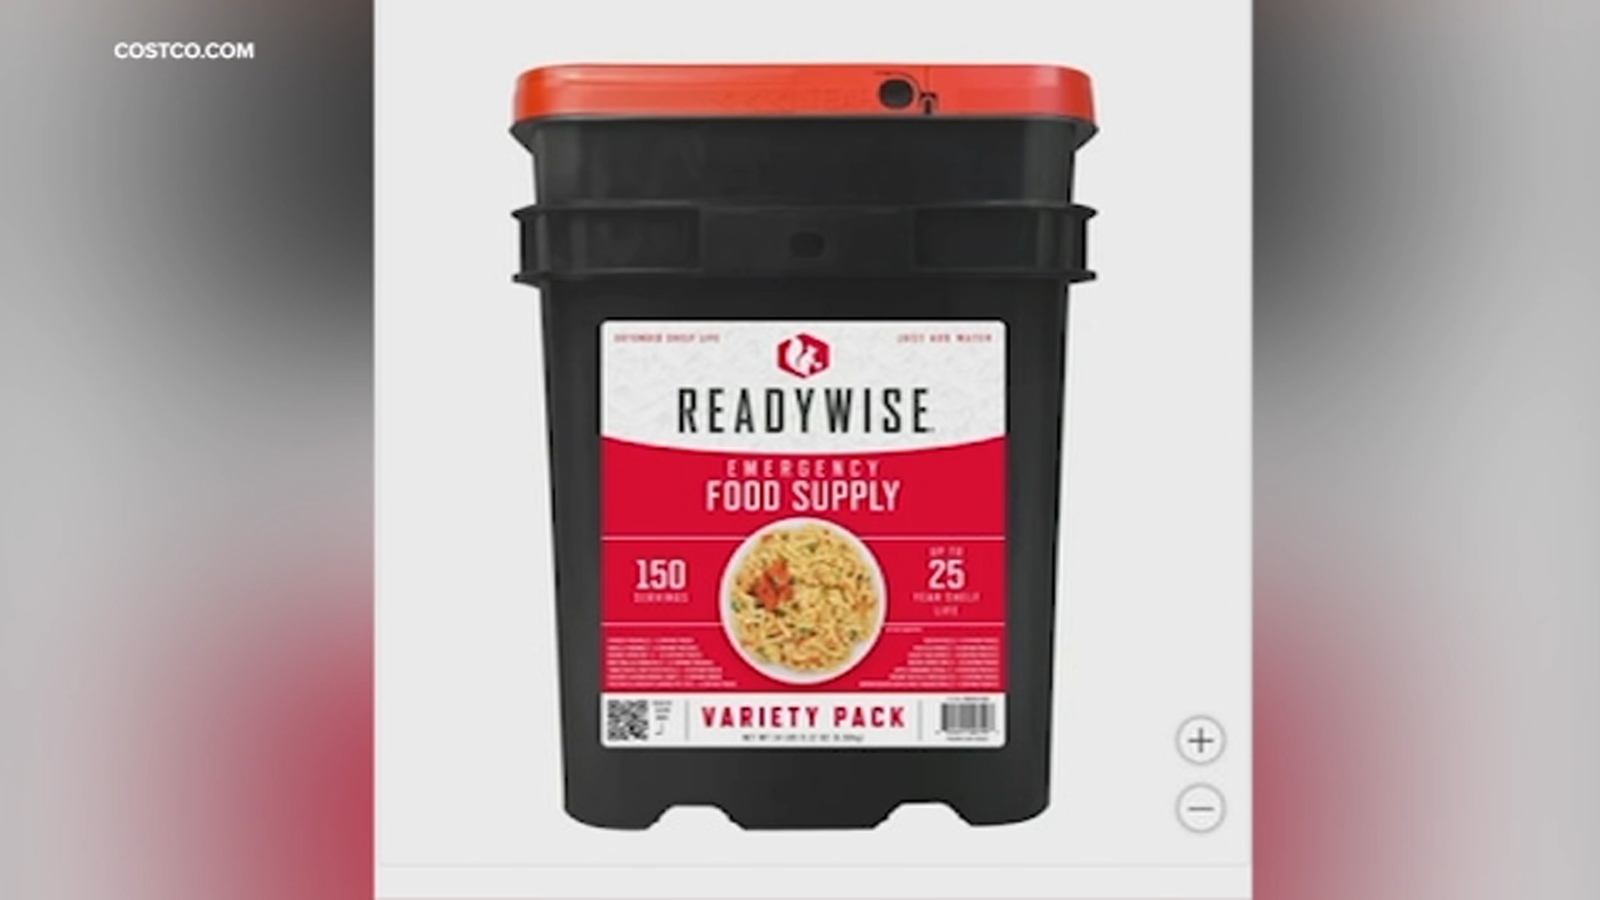 Expert weighs in on now-viral Costco ‘apocalypse’ emergency food bucket | What’s inside and how to make a basic disaster kit [Video]